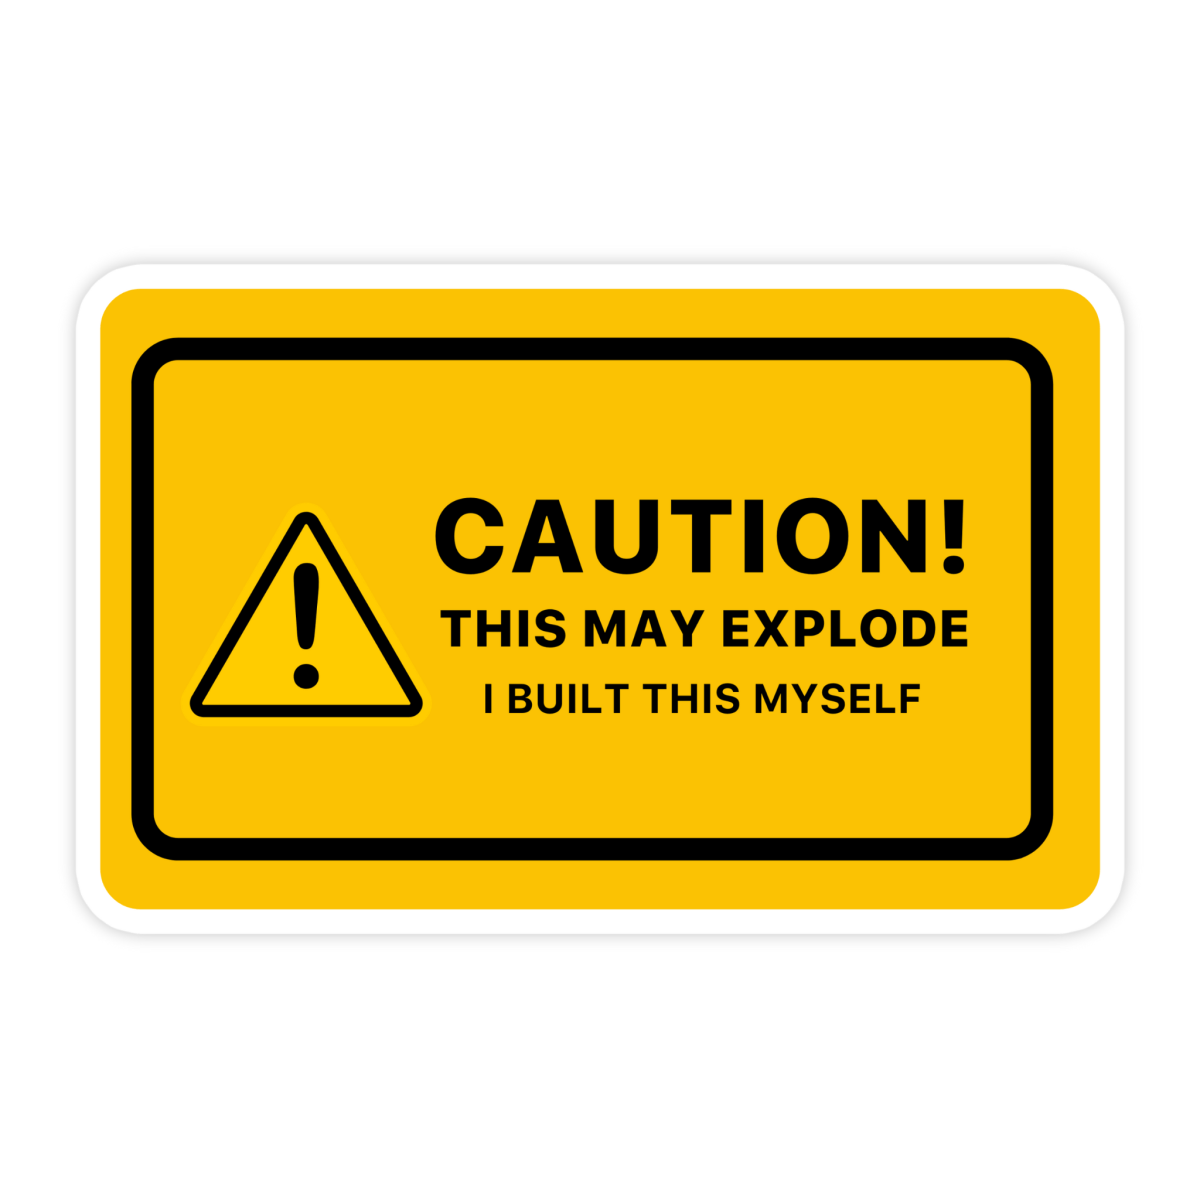 Caution May Explode Built This Myself Sticker - stickerbullCaution May Explode Built This Myself StickerRetail StickerstickerbullstickerbullExplodeYellow_#81Caution May Explode Built This Myself Sticker